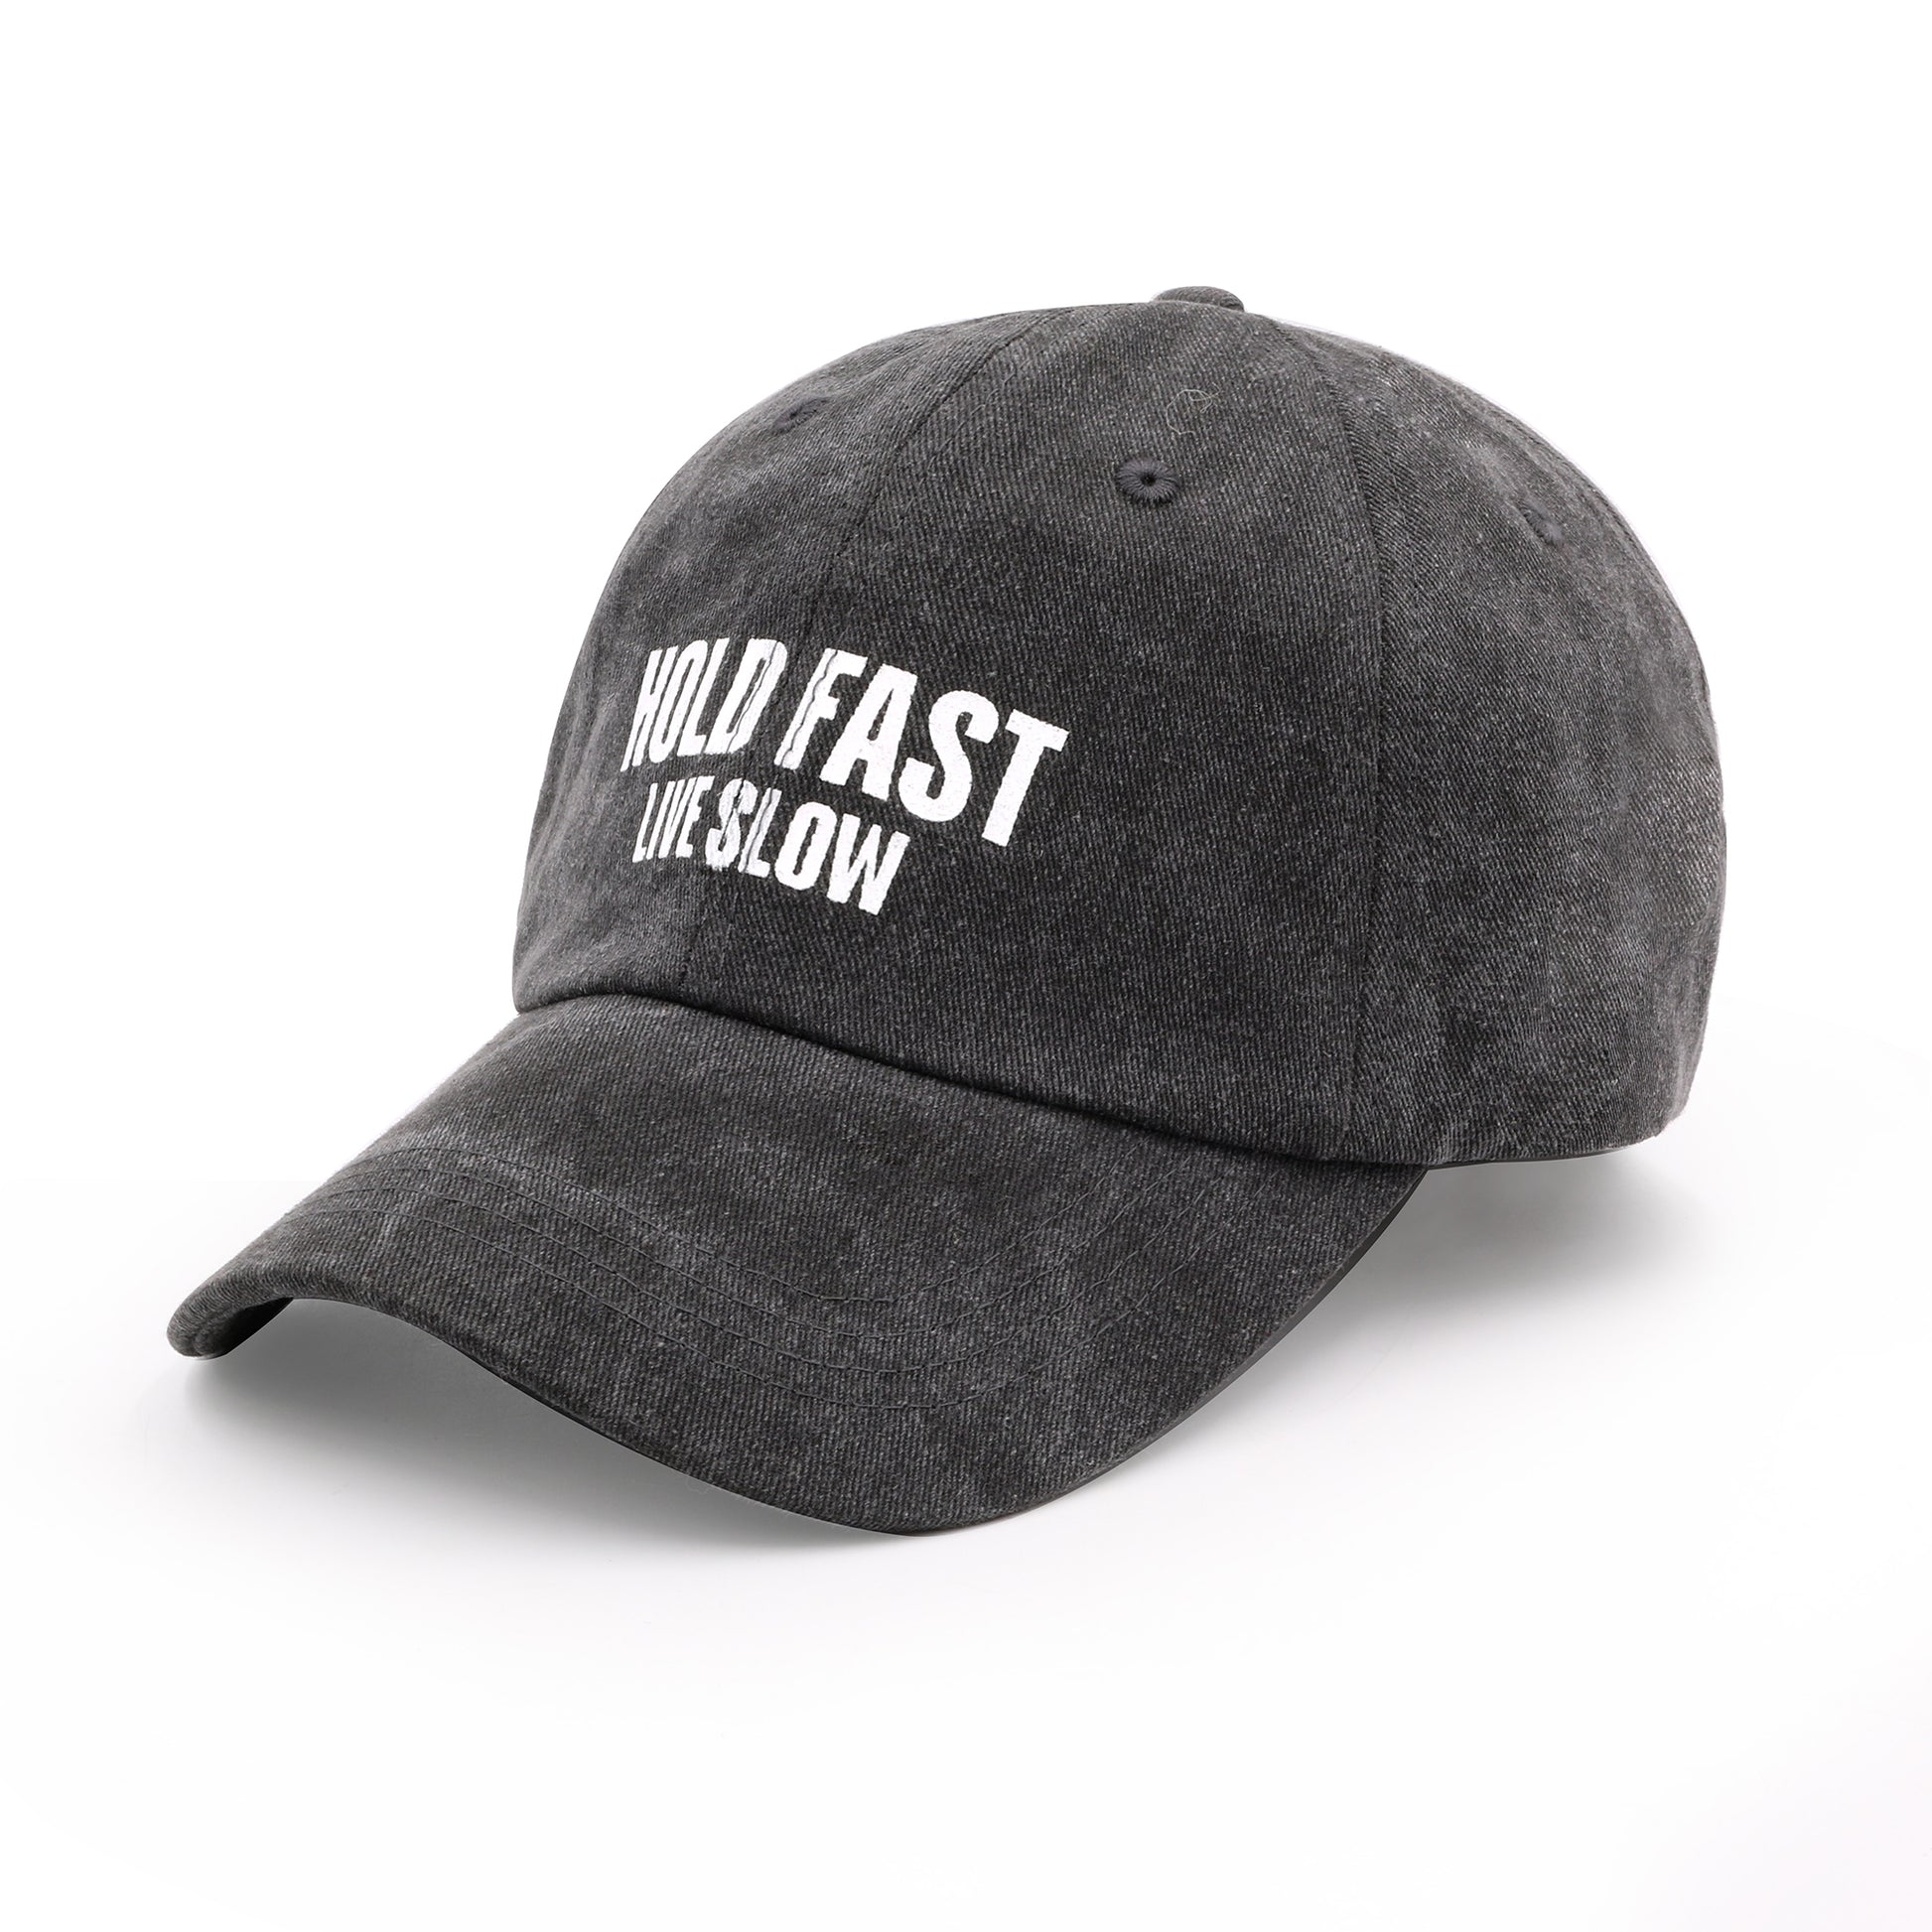 HOLD FAST LIVE SLOW This Good Hat for Women Men Funny Adjustable Embroidery Water Washing Baseball Cap - ACCEHUT